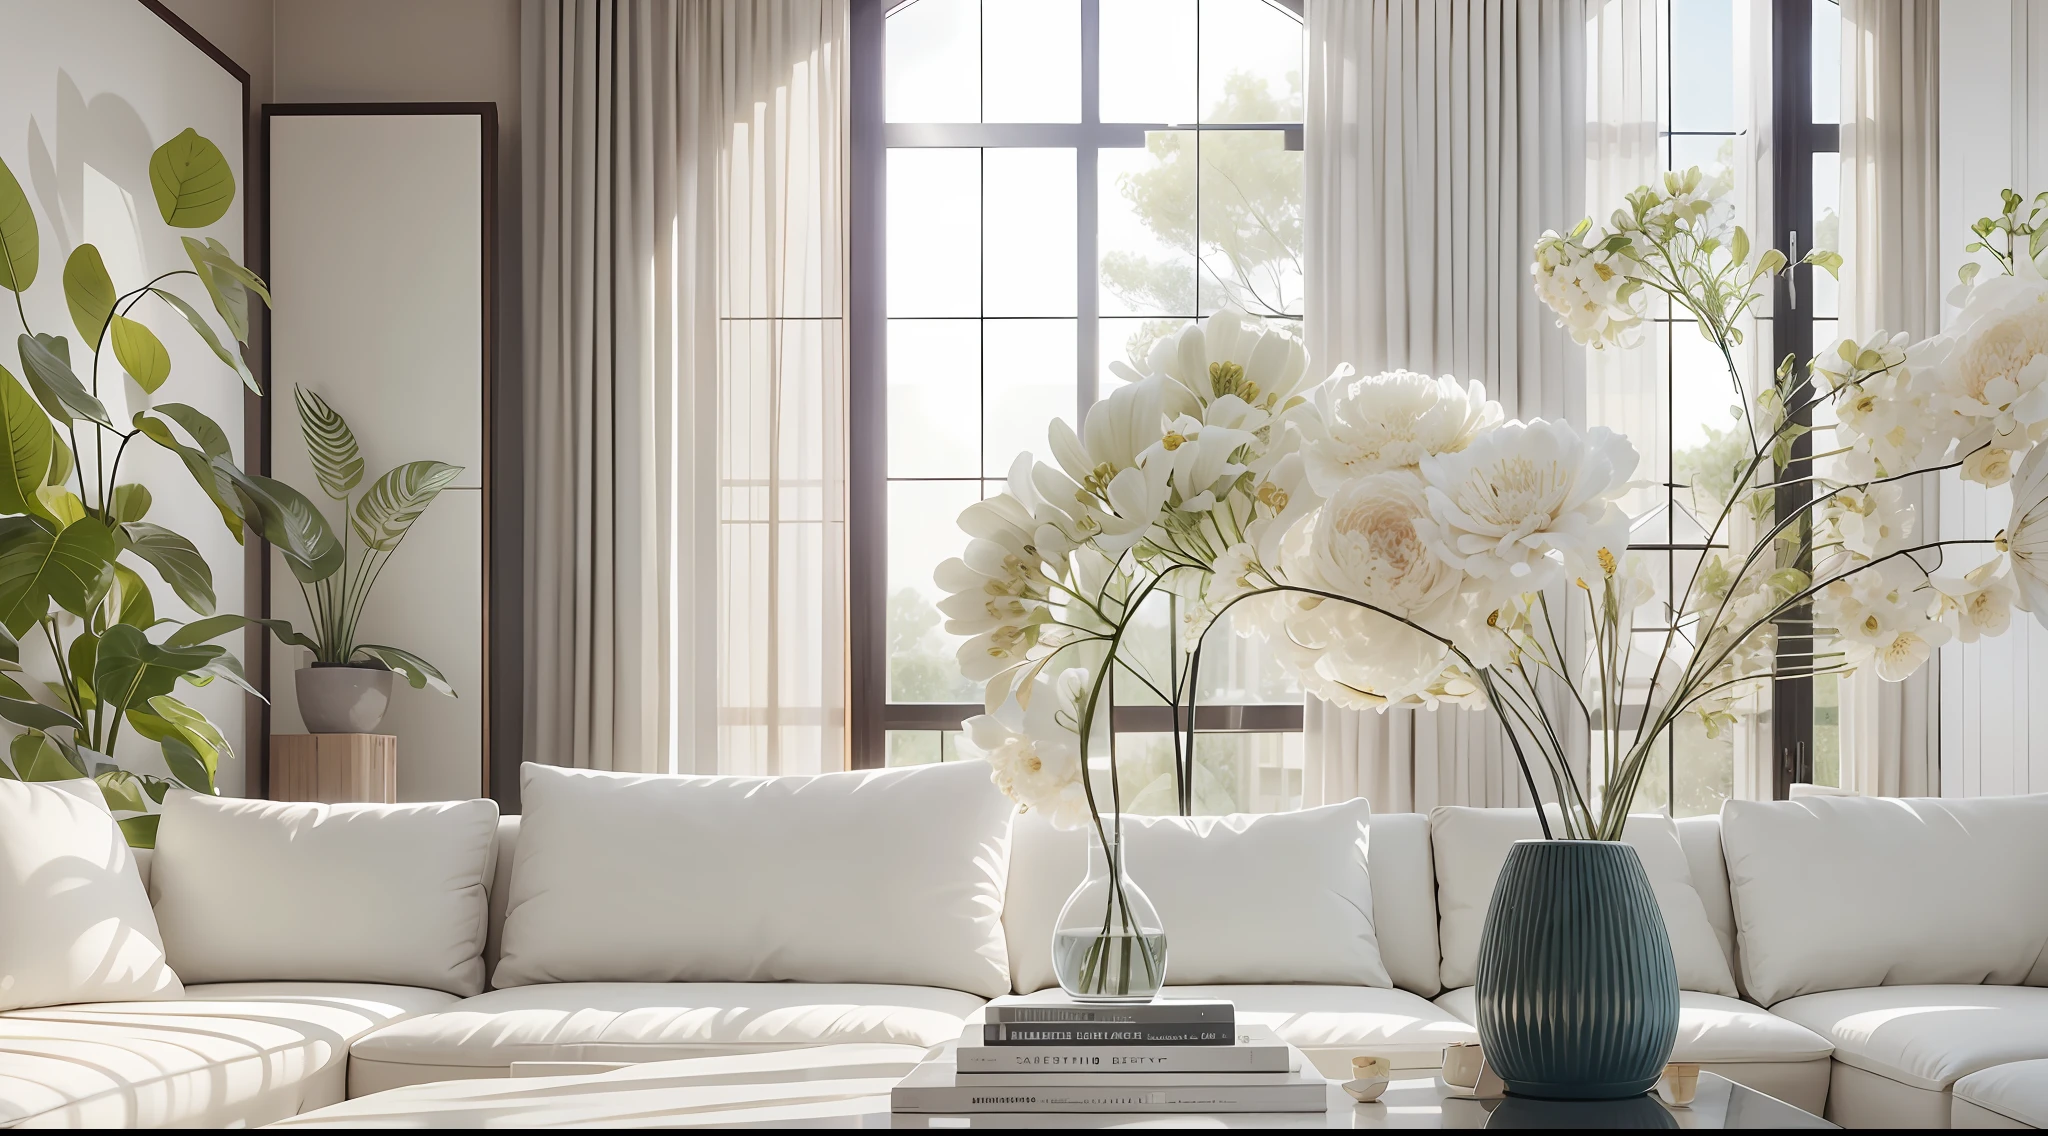 Large minimalist living room，Master-level works，Rare flowers and plants（1:0.02），sun's rays，No main light desigward winning masterpiece，Incredible details Large windows，highly  detailed，Harper's Bazaar art，fashion magazine，fluency，Clear focus，8K，rendering by octane